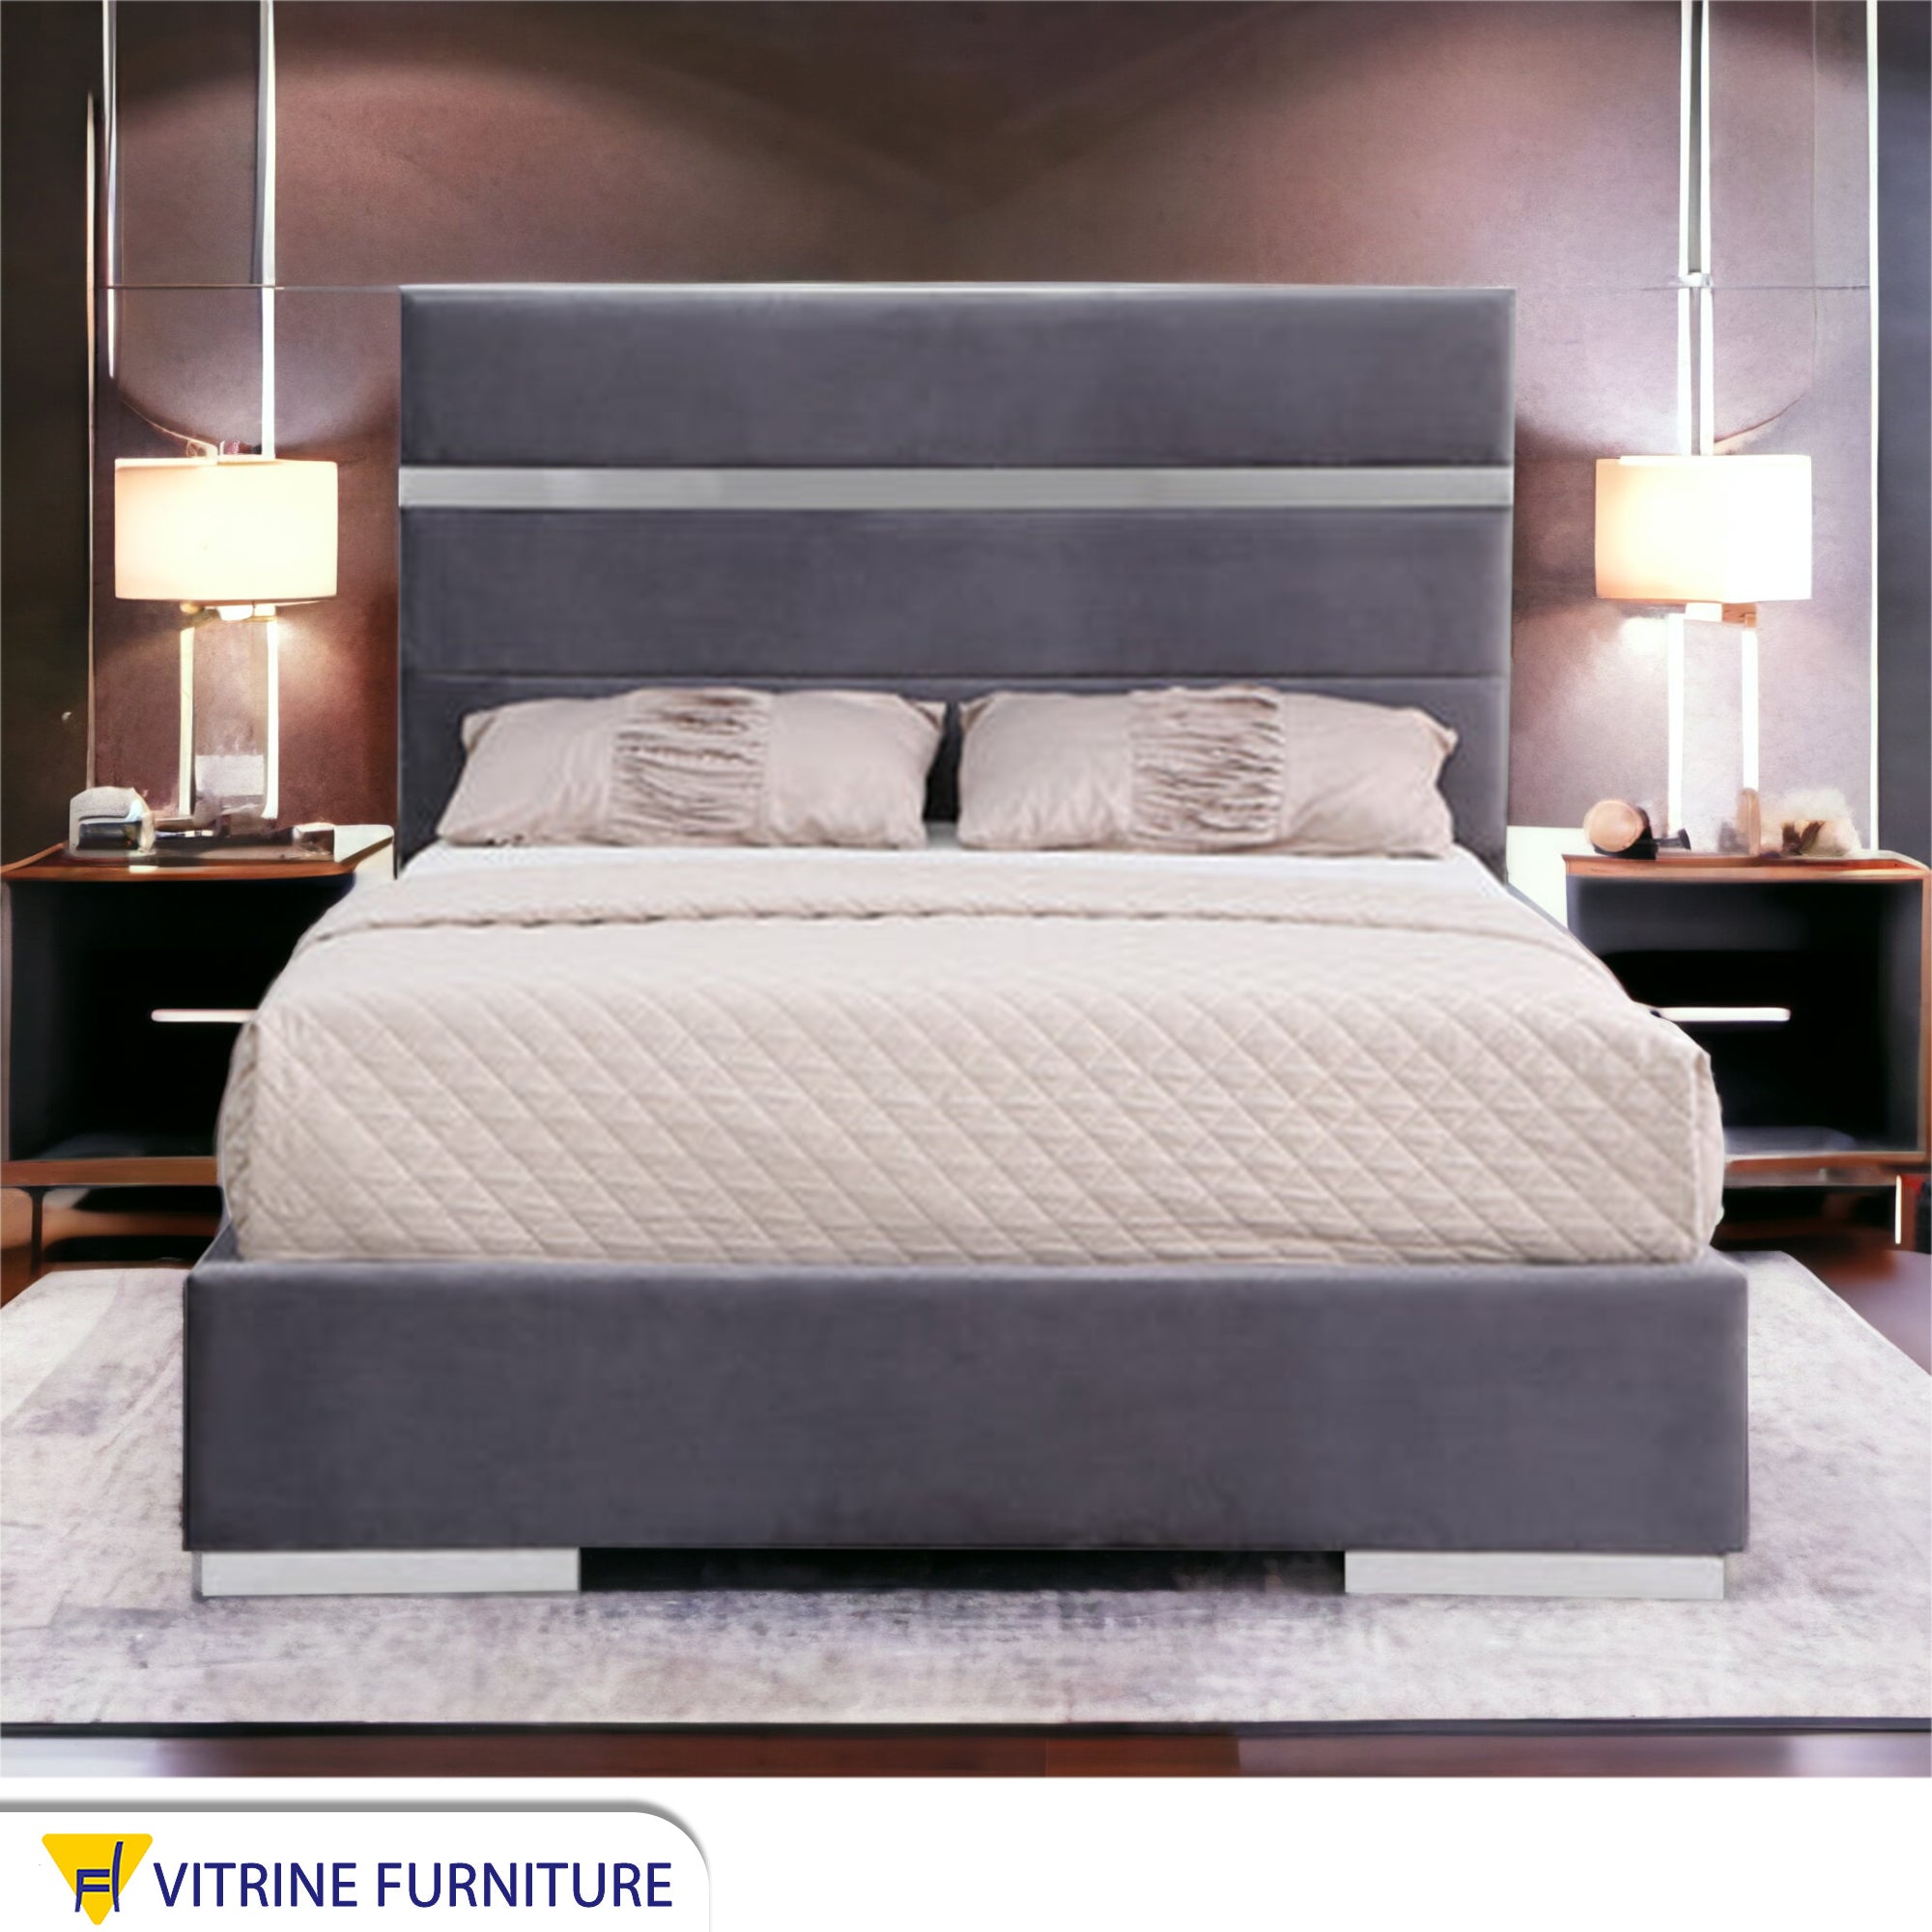 Single bed divided into two parts, dark grey